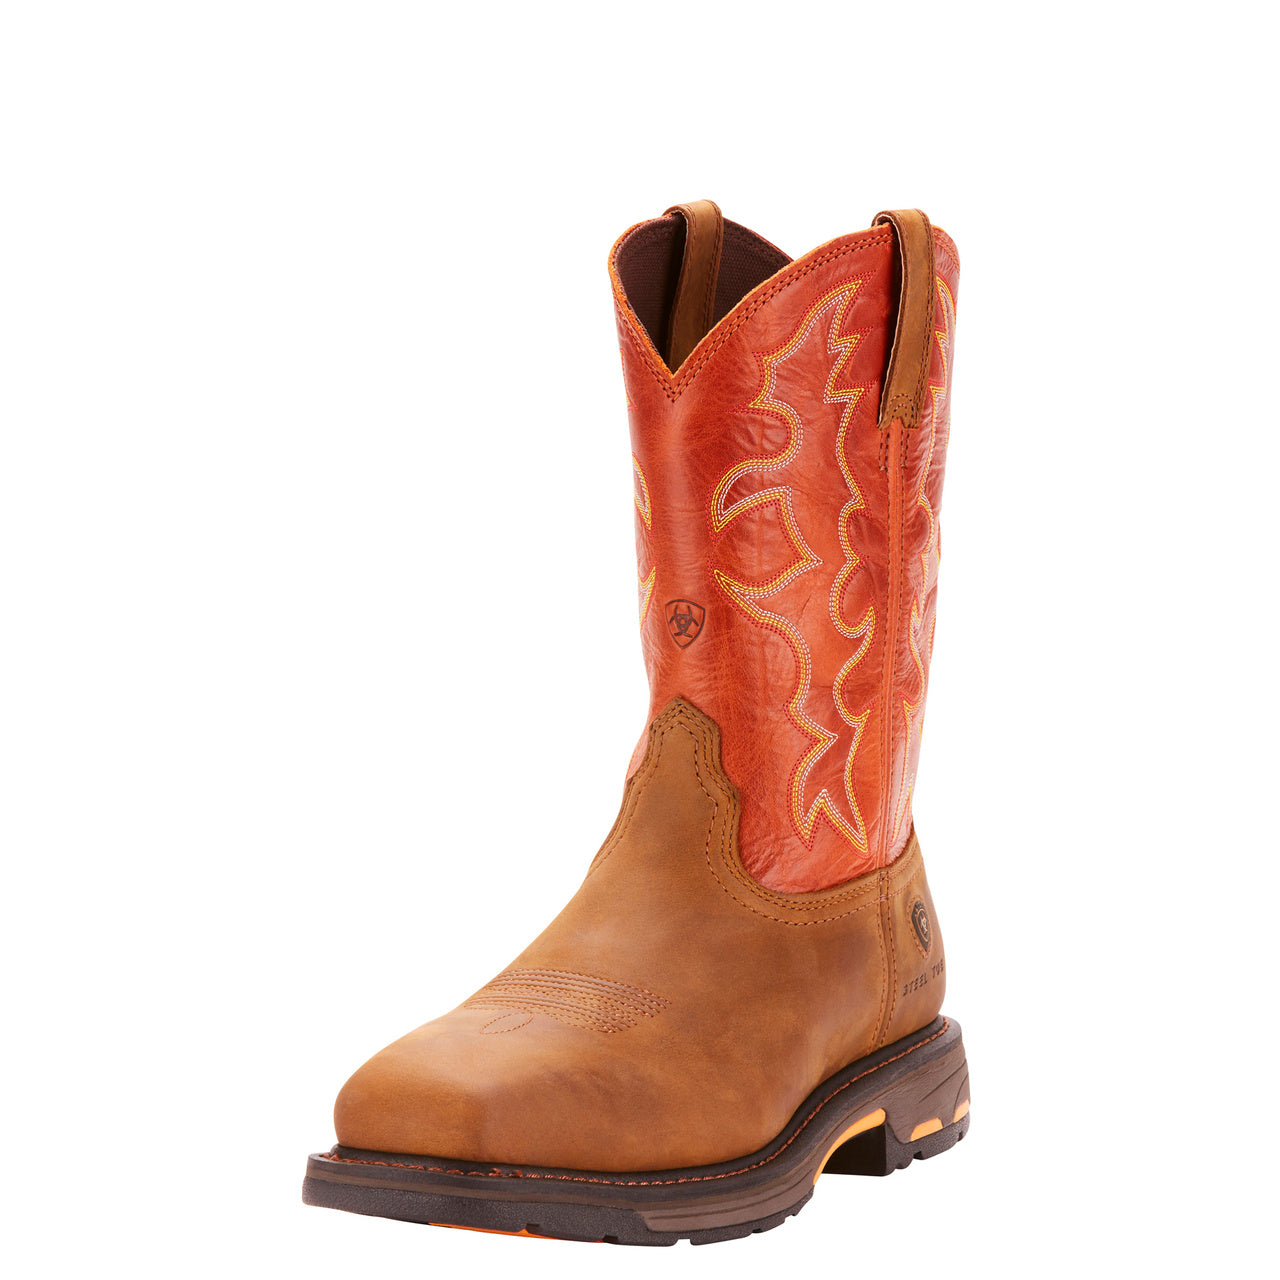 Ariat Workhog Wide Square Toe Boot 10.5 D